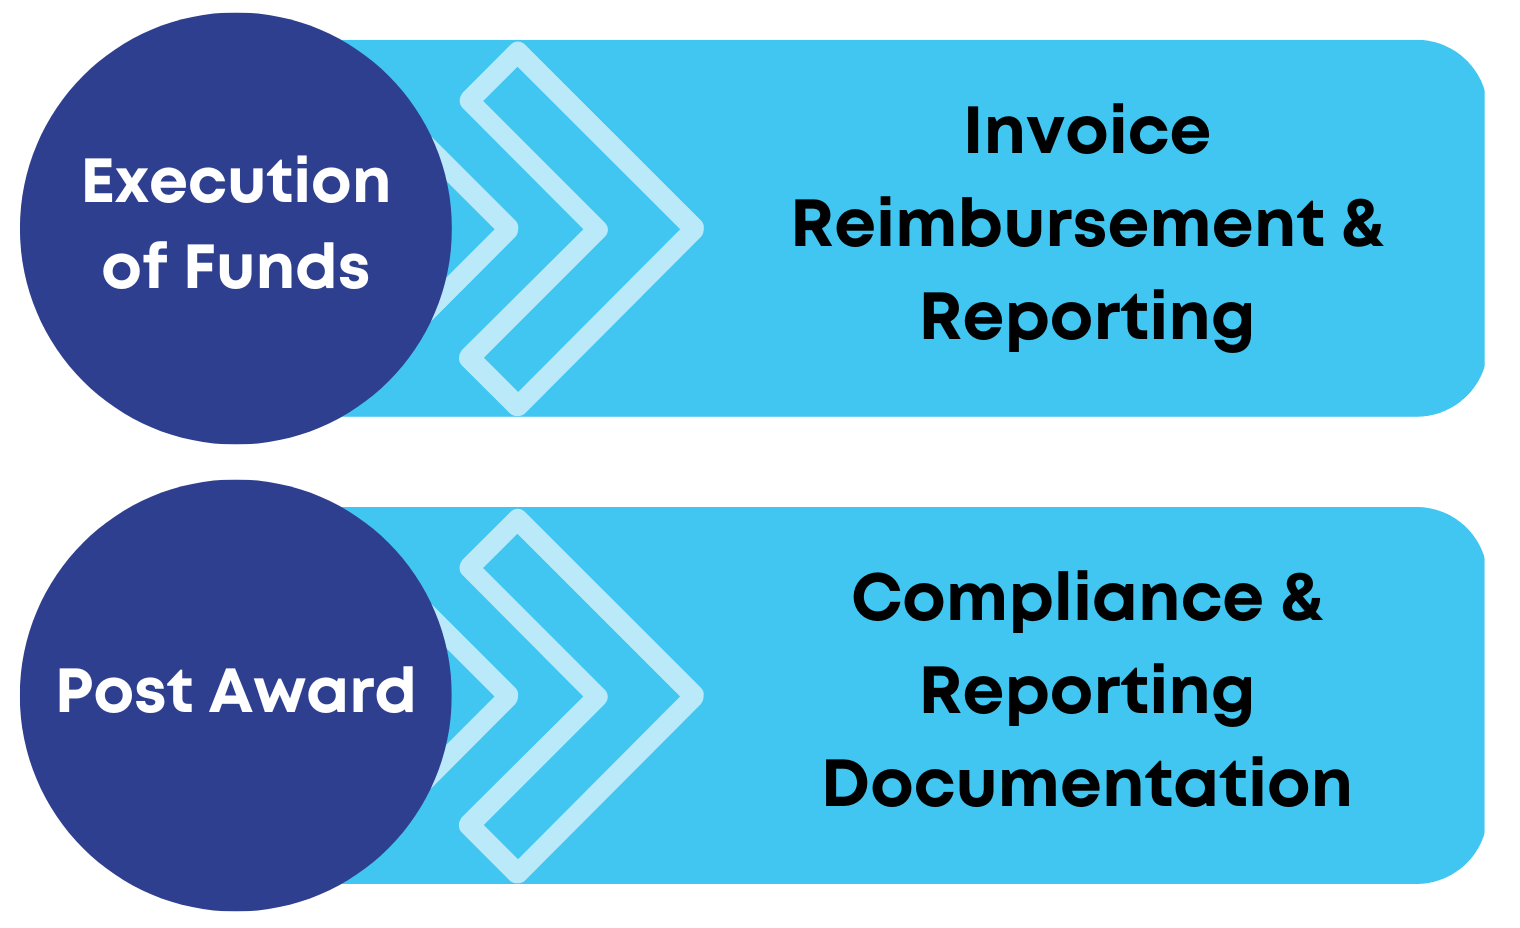 Widelity's services: Invoice reimbursement, reporting, and compliance